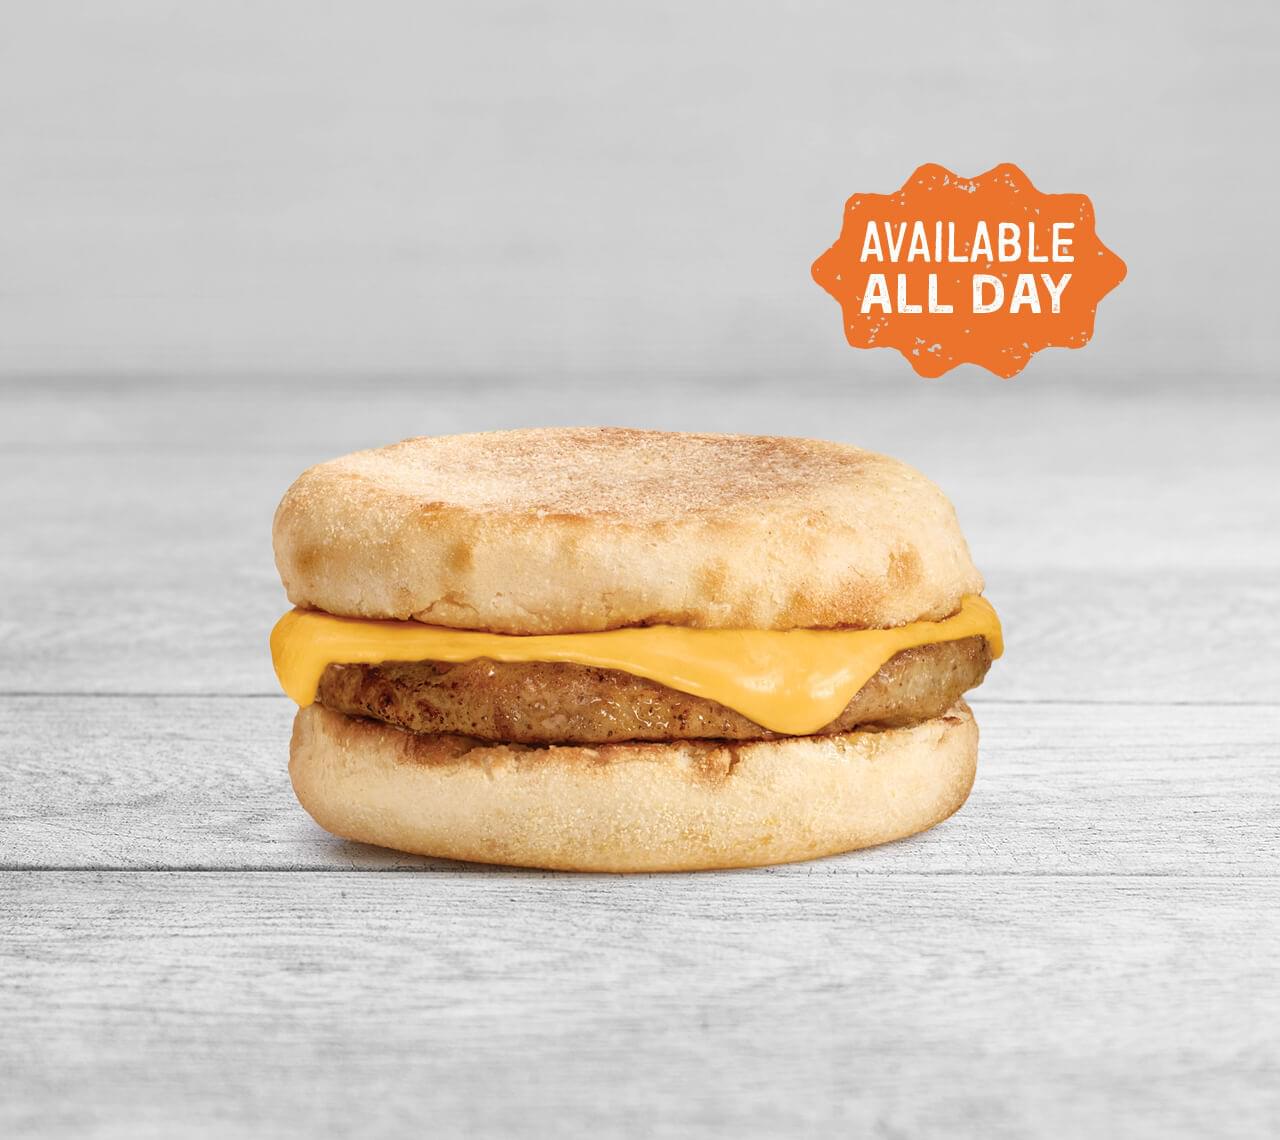 A&W Sausage & Cheddar Nutrition Facts